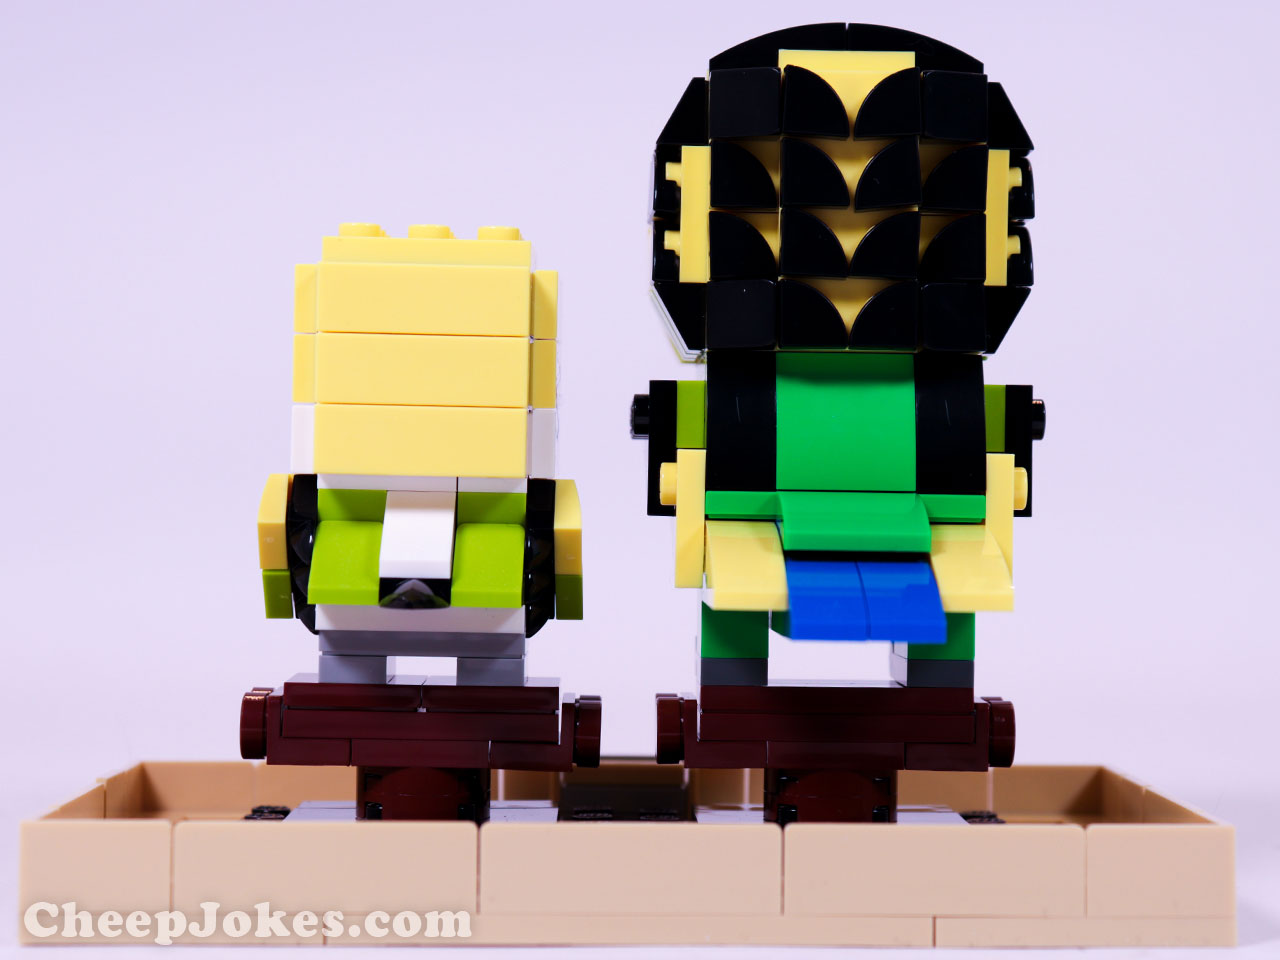 Bird fans will flock to this BrickHeadz™ Budgie (40443) build-and-display set. The budgie and chick both sit on iconic BrickHeadz stands designed to look like wooden bird perches. The stands fit into a sturdy brown base that resembles the bottom of a birdcage and comes with 2 stickers – 1 with feathers, 1 with footprints – for decorating the base. This buildable pet set is a perfect gift for all kids, BrickHeadz collectors and anyone who loves birds.